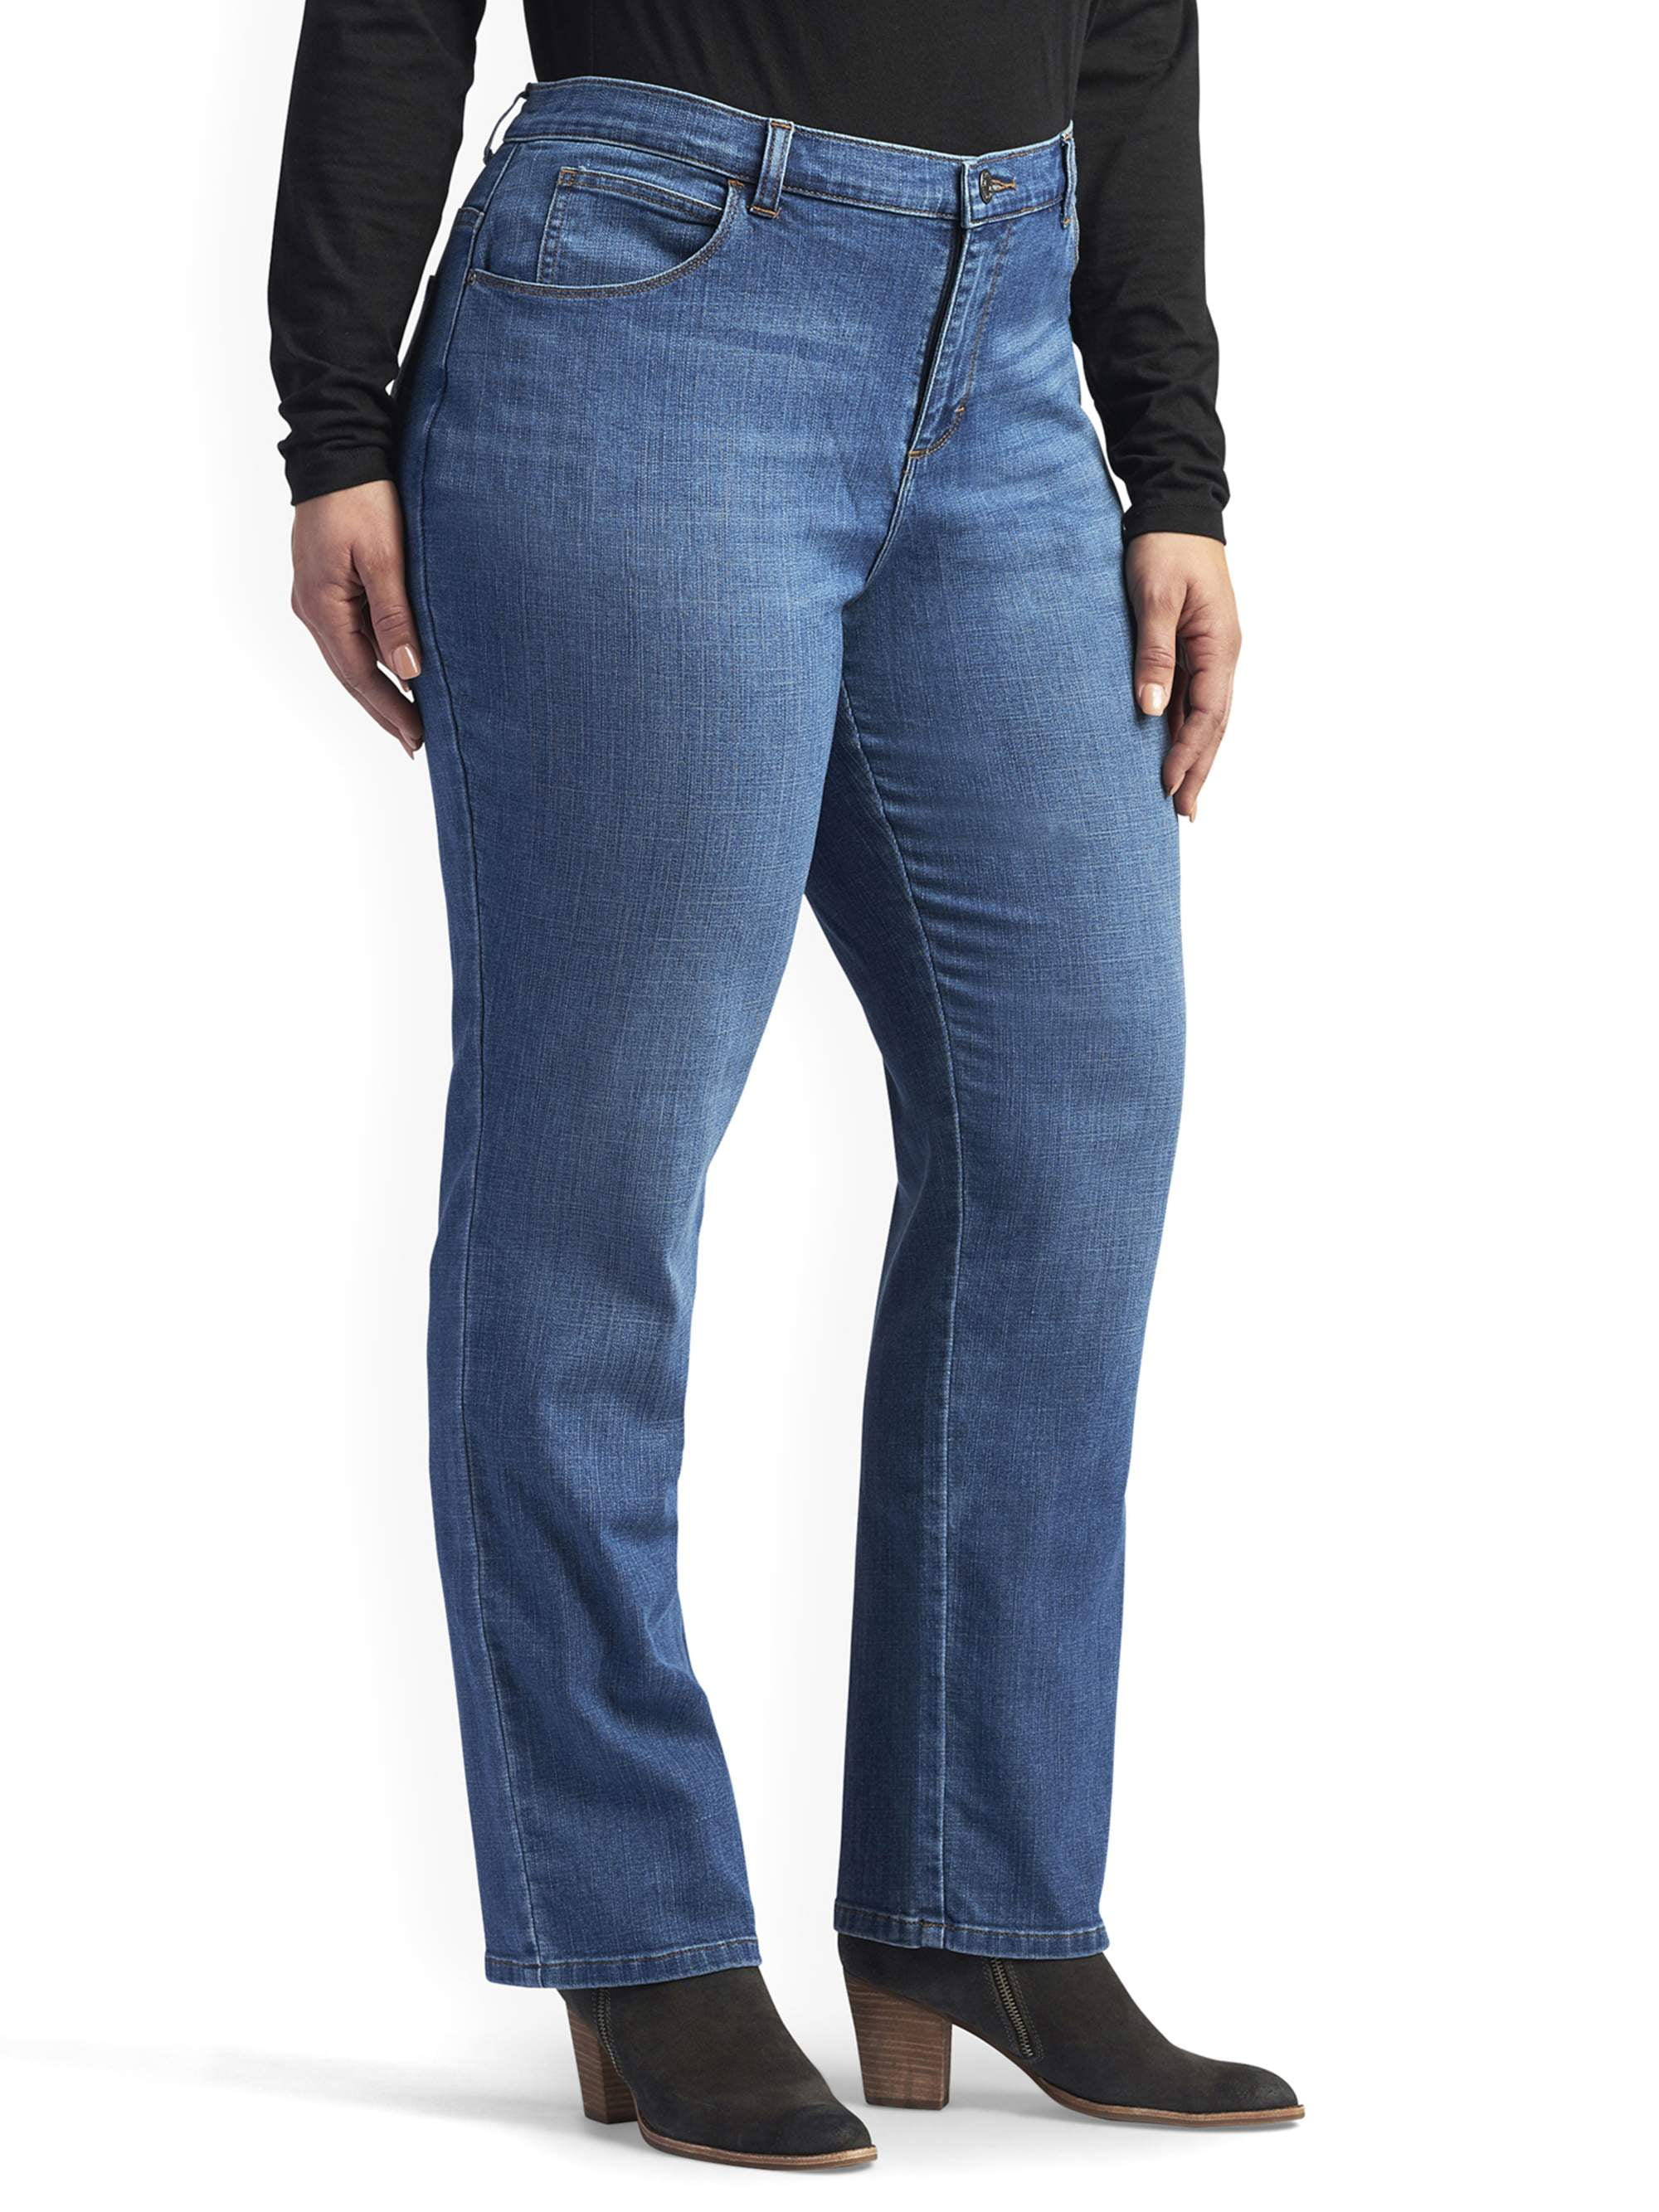 Integrere monarki Stolthed Lee Womens's Plus Stretch Relaxed Fit Straight Leg Jean - Walmart.com